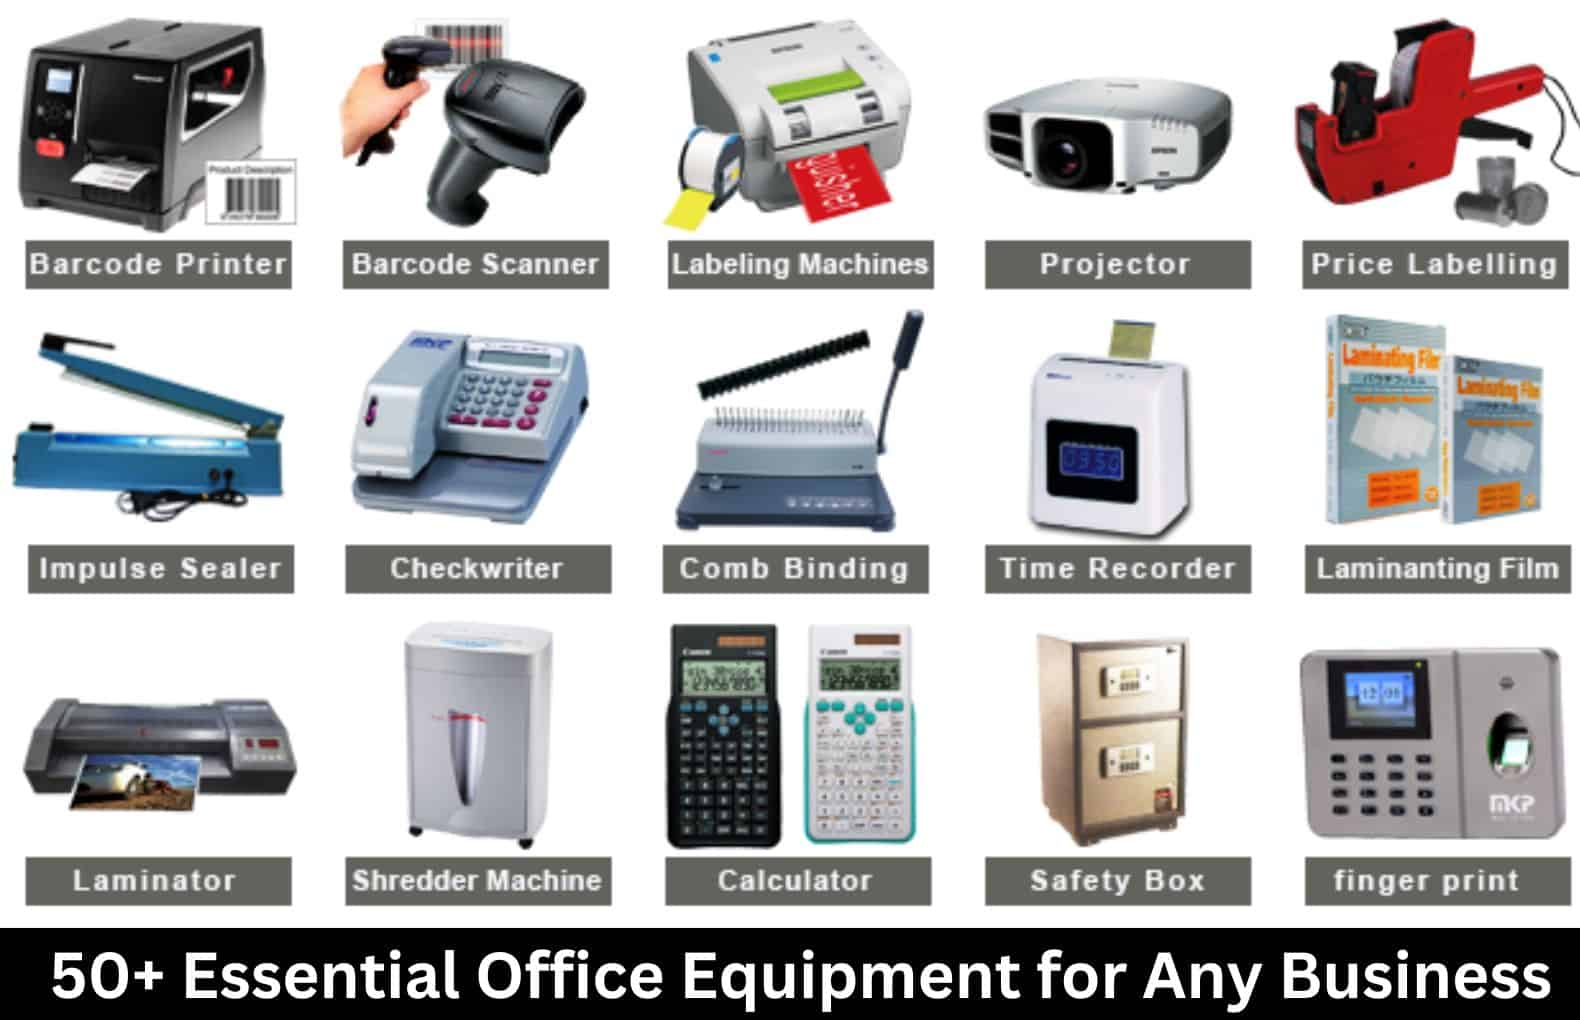 https://civiconcepts.com/wp-content/uploads/2022/12/50-Essential-Office-Equipment-for-Any-Business.jpg